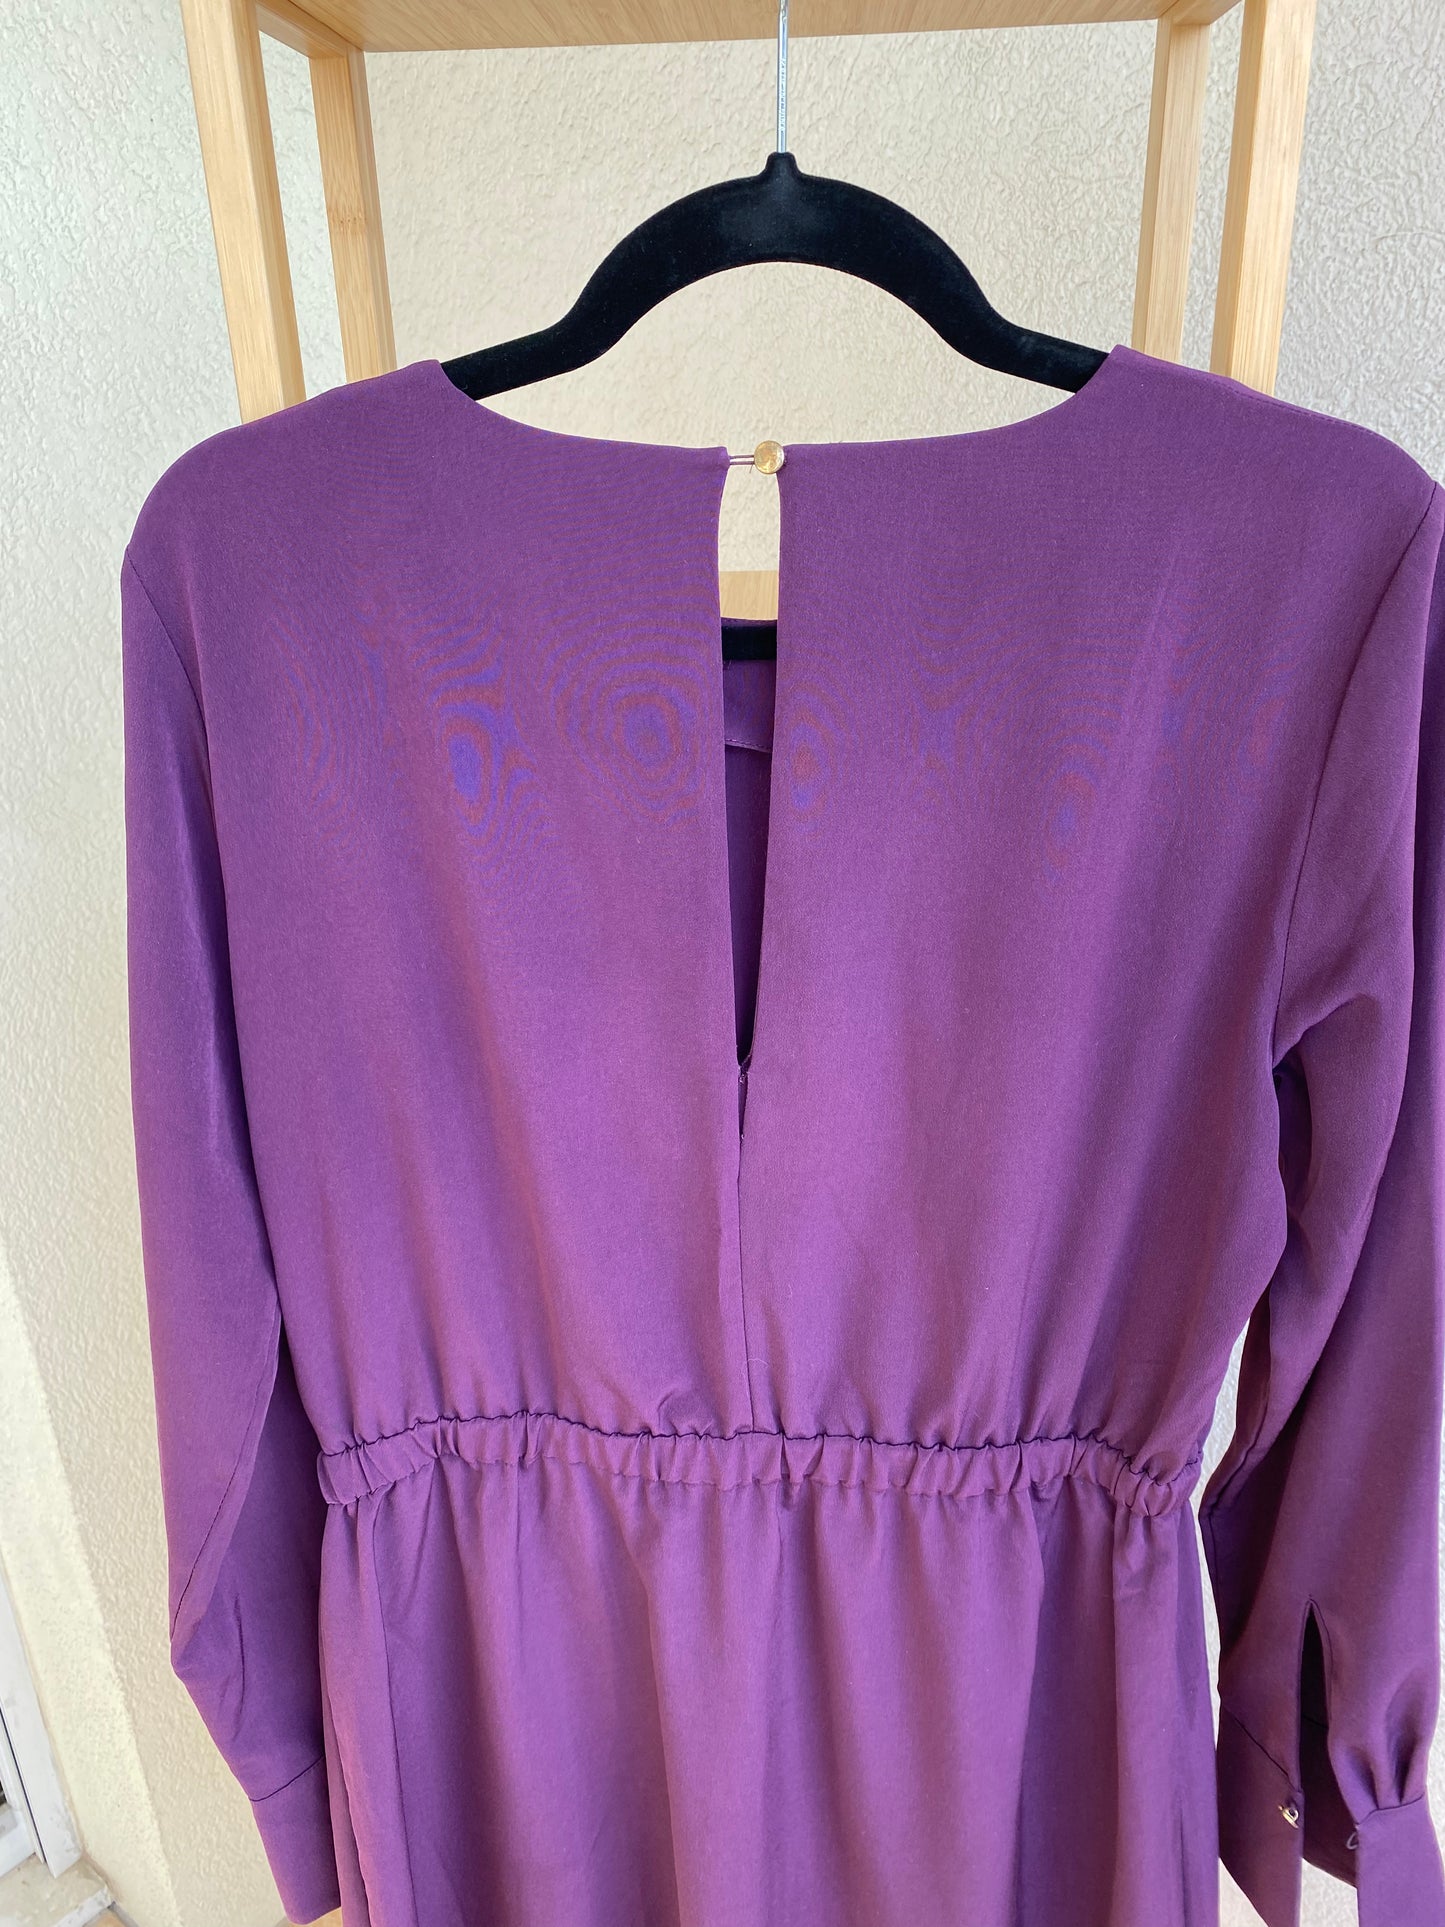 Robe H&M prune chic Taille 40/42